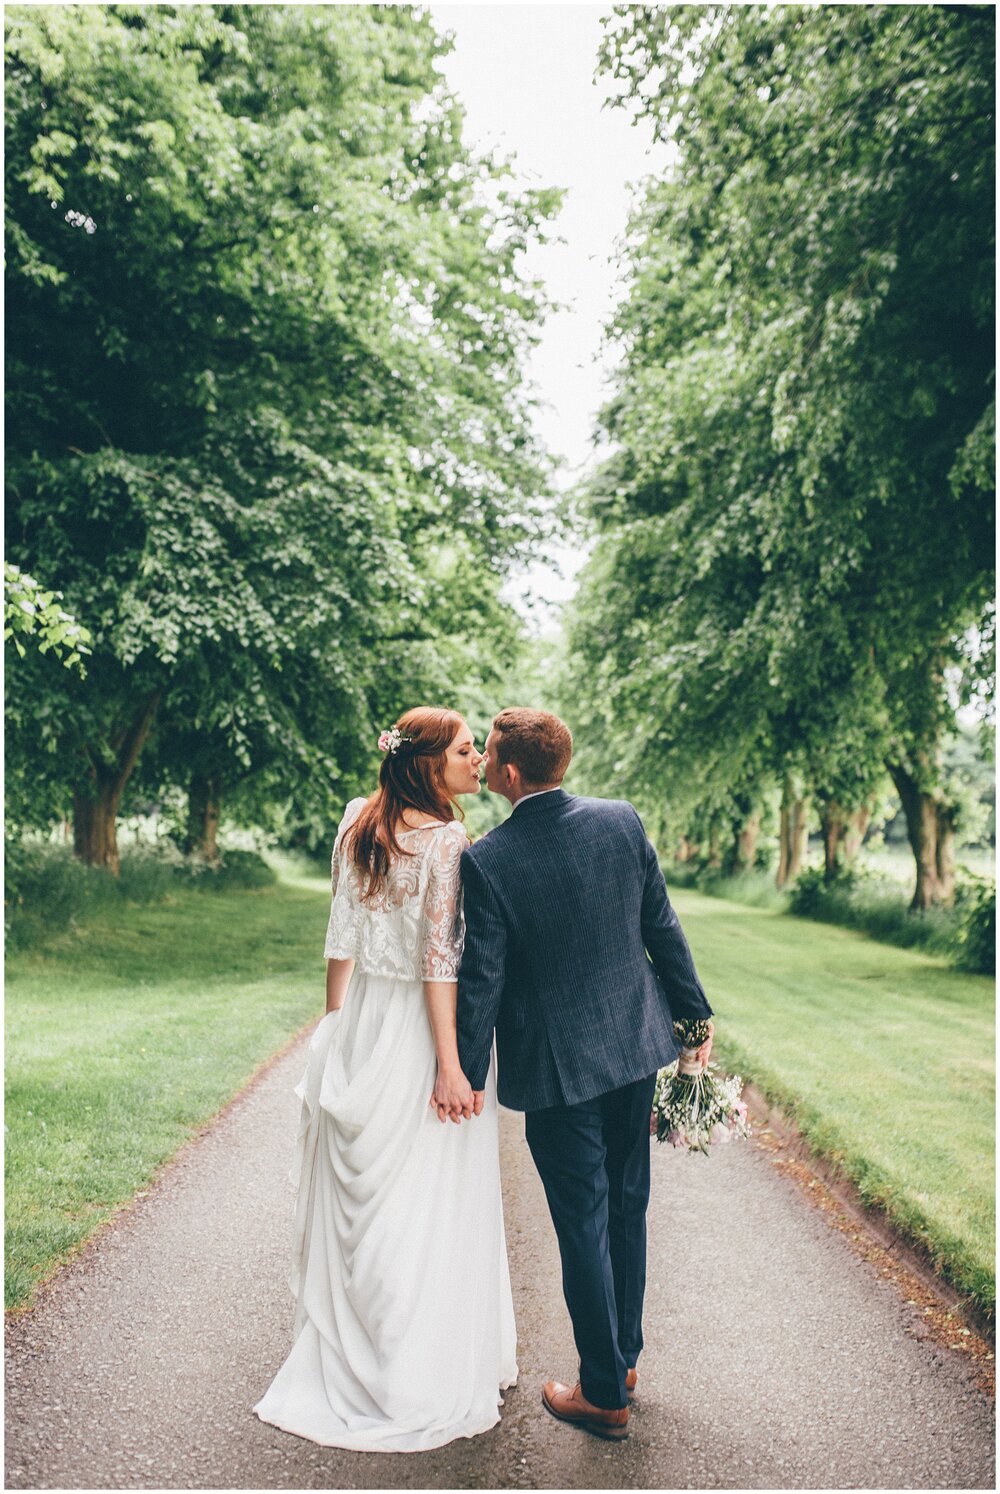 Bride and groom stroll hand in hand down a tree-lined path in Cheshire.